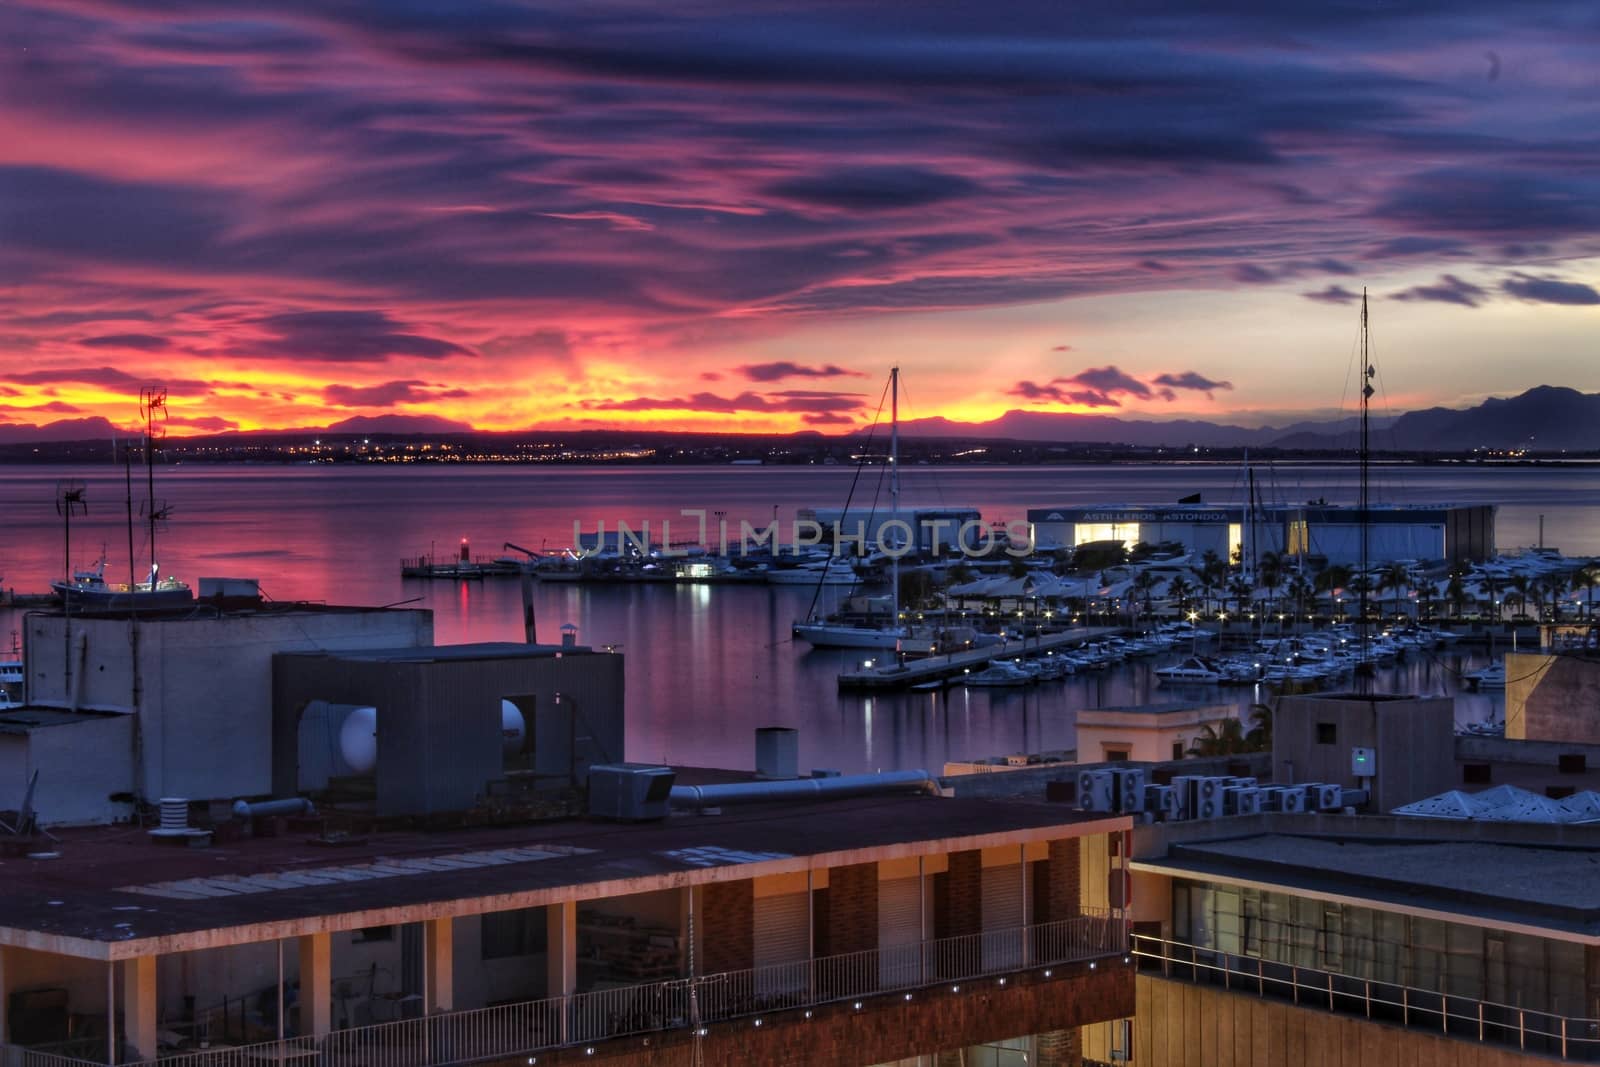 Spectacular and colorful sunset in Santa Pola by soniabonet